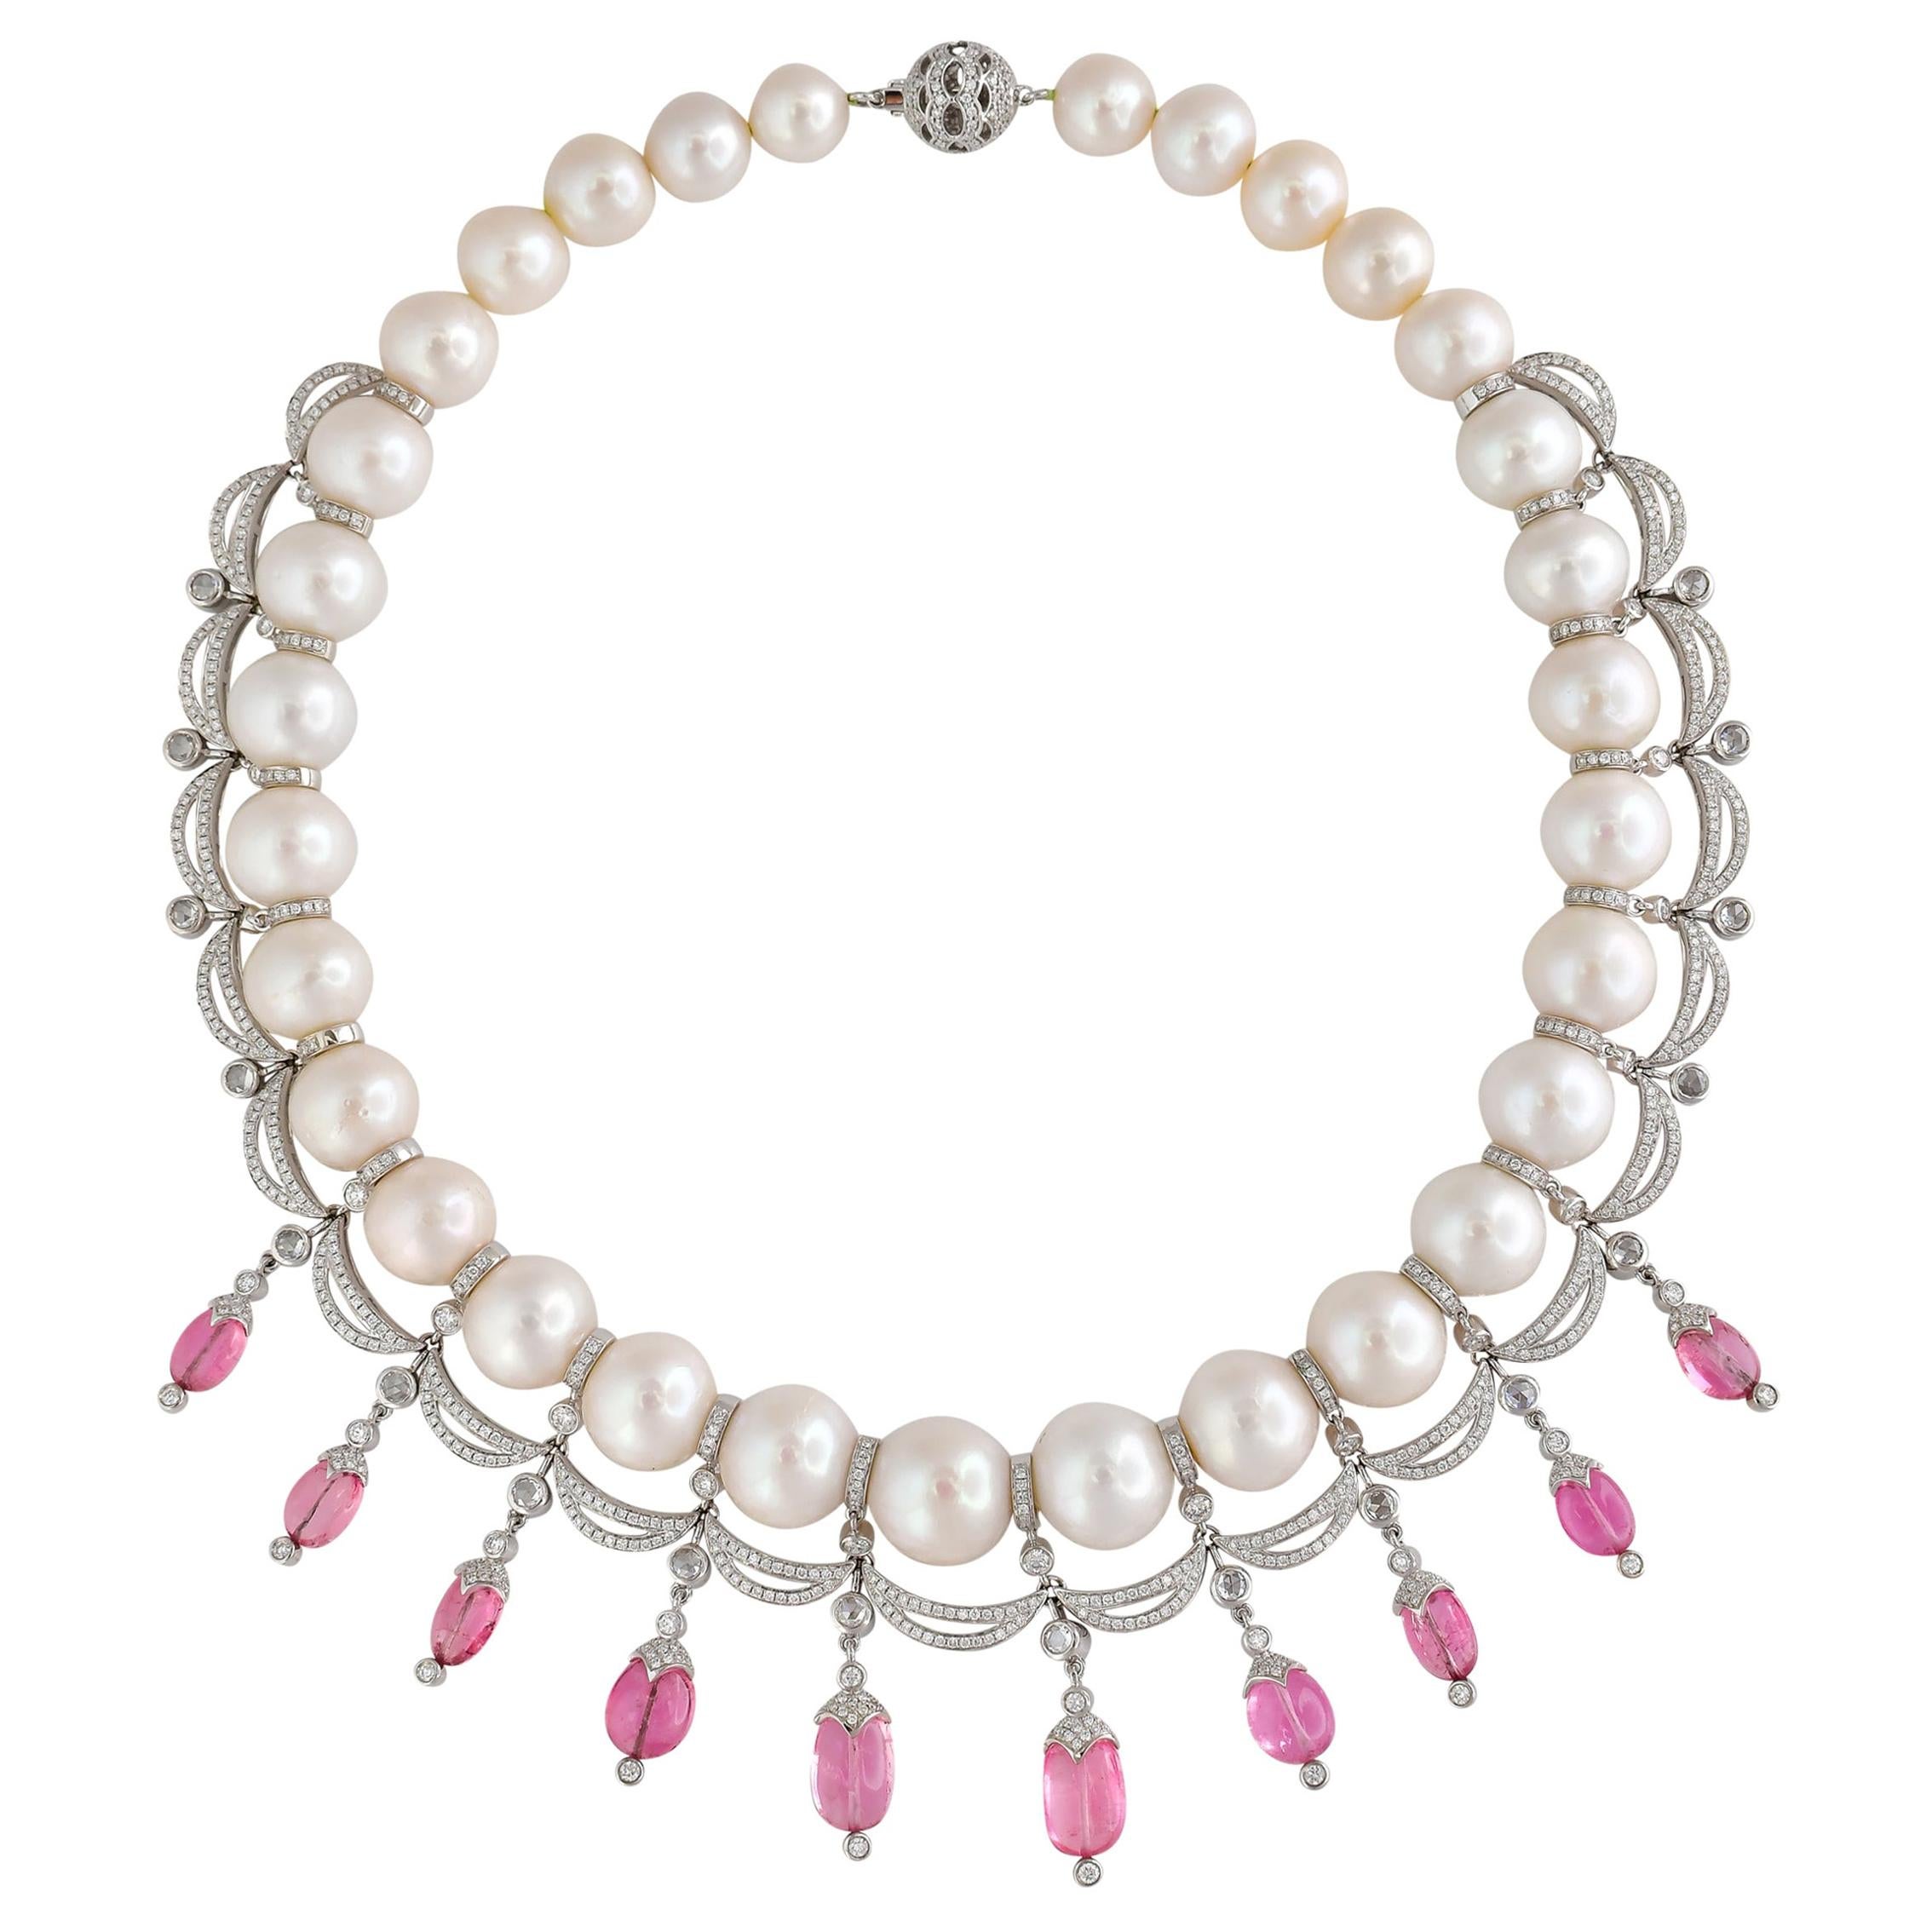 477 Carat Pearl Necklace in 18 Karat Gold with Diamonds and Pink Tourmaline